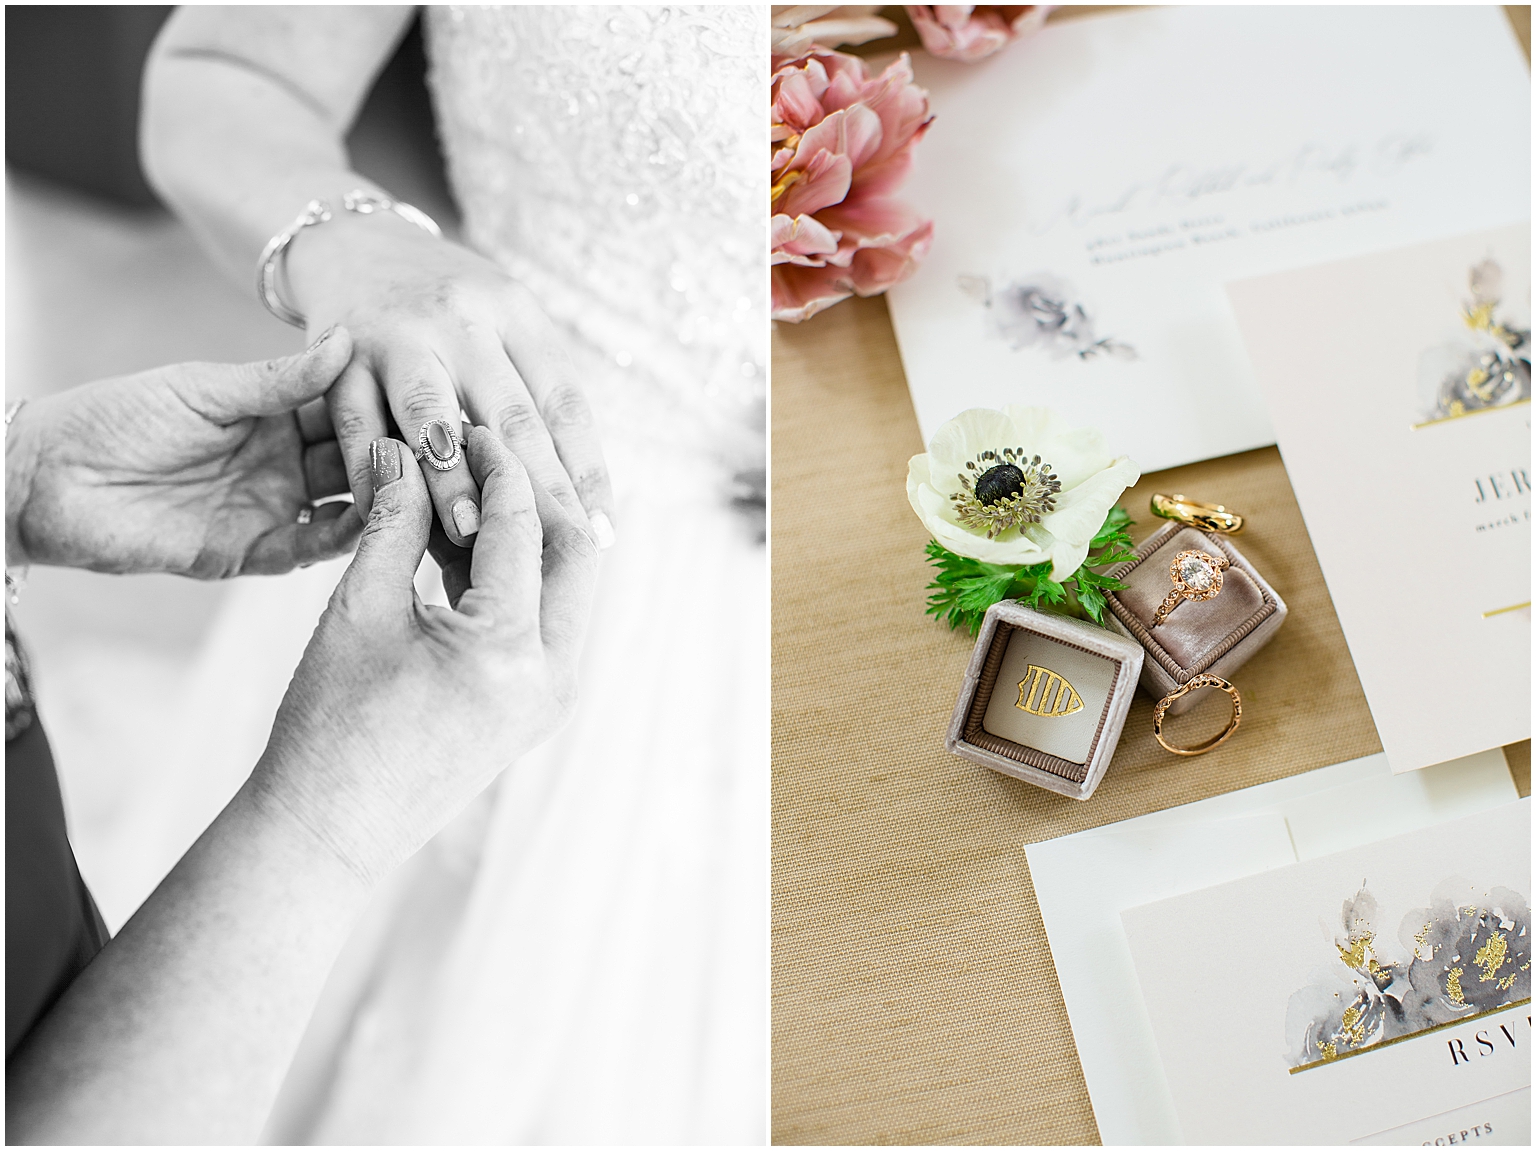 Mother of the bride putting a family heirloom ring on her daughter's finger, and a beautiful flat lay of wedding invitations and rings